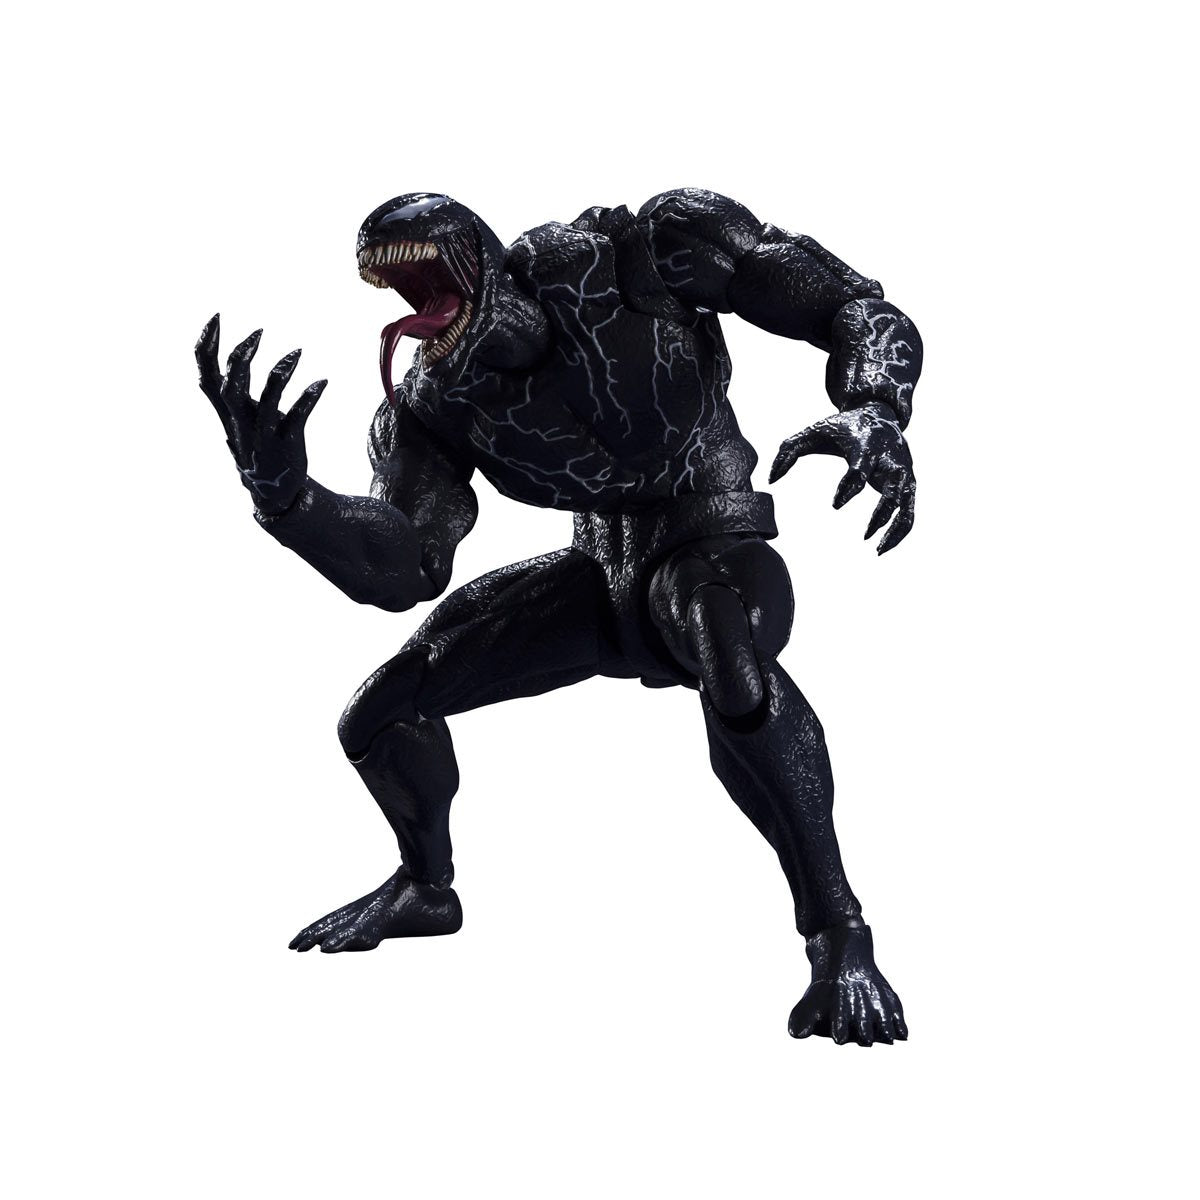 Venom: Let There Be Carnage S.H.Figuarts Figure by Bandai -Bandai - India - www.superherotoystore.com